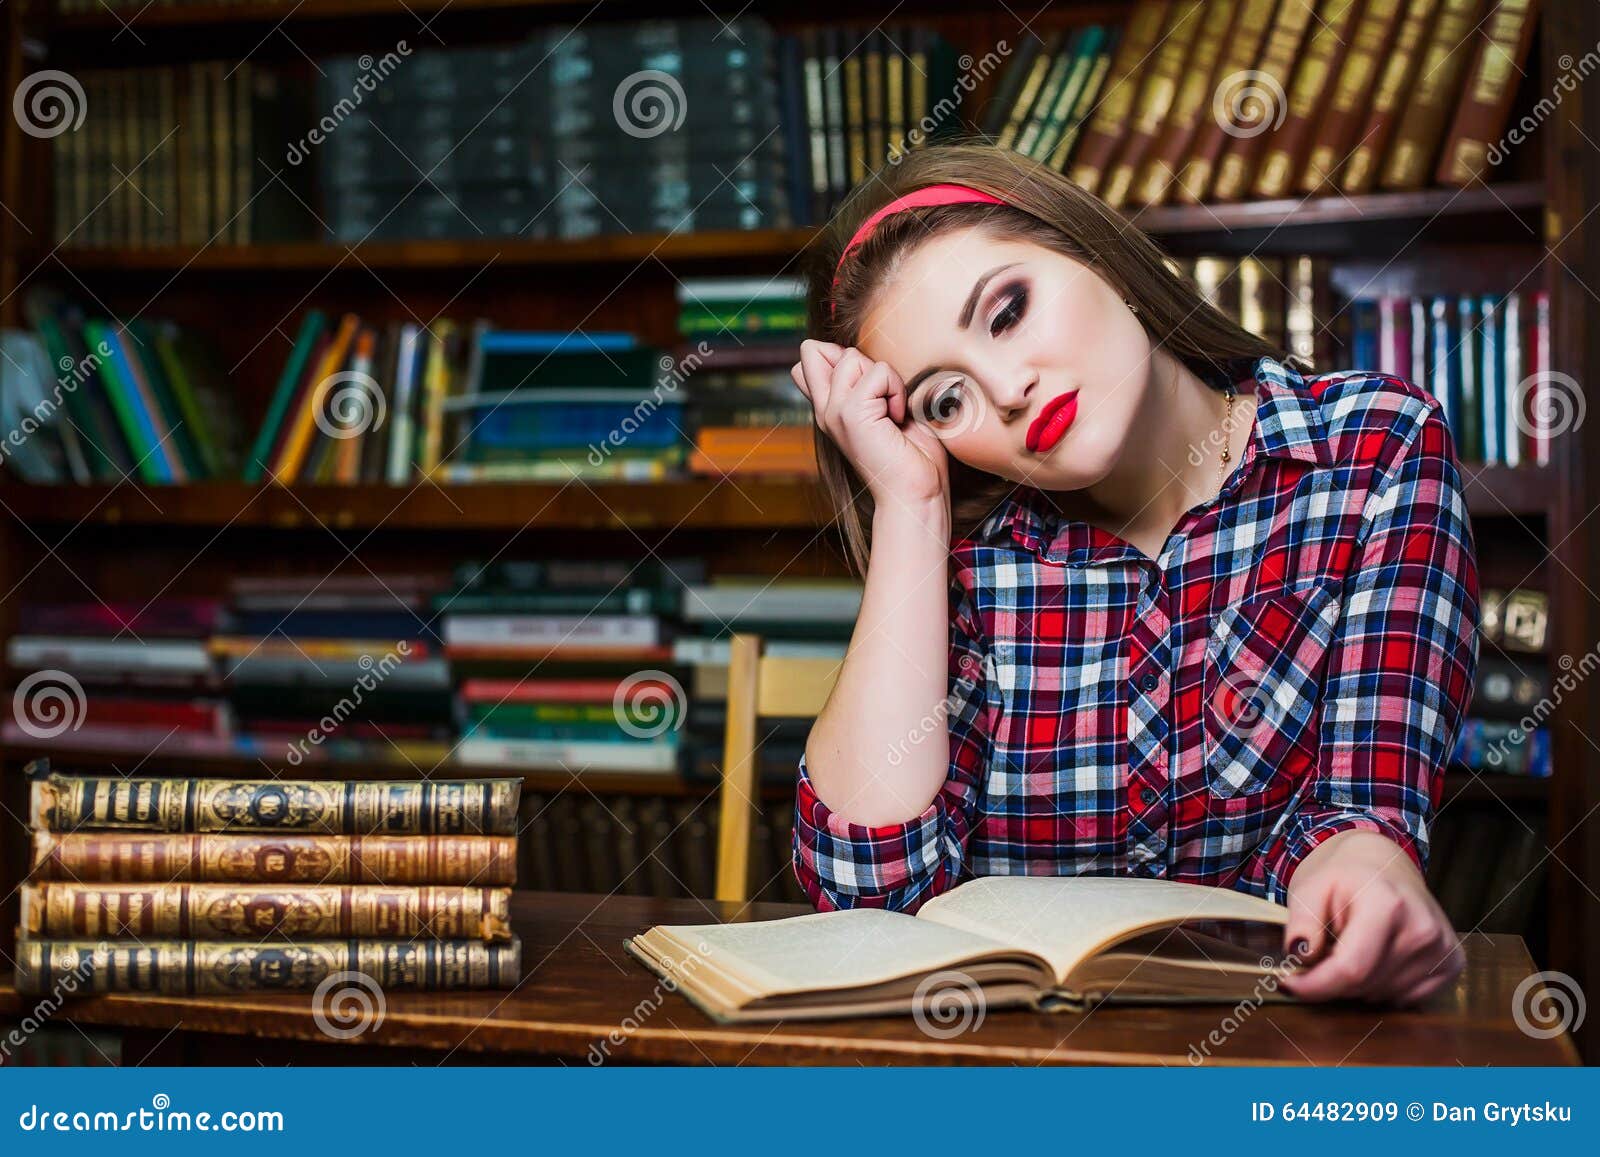 Clever Female Student Girl Sitting In Library With Books. Stock Image - Image of ...1300 x 957